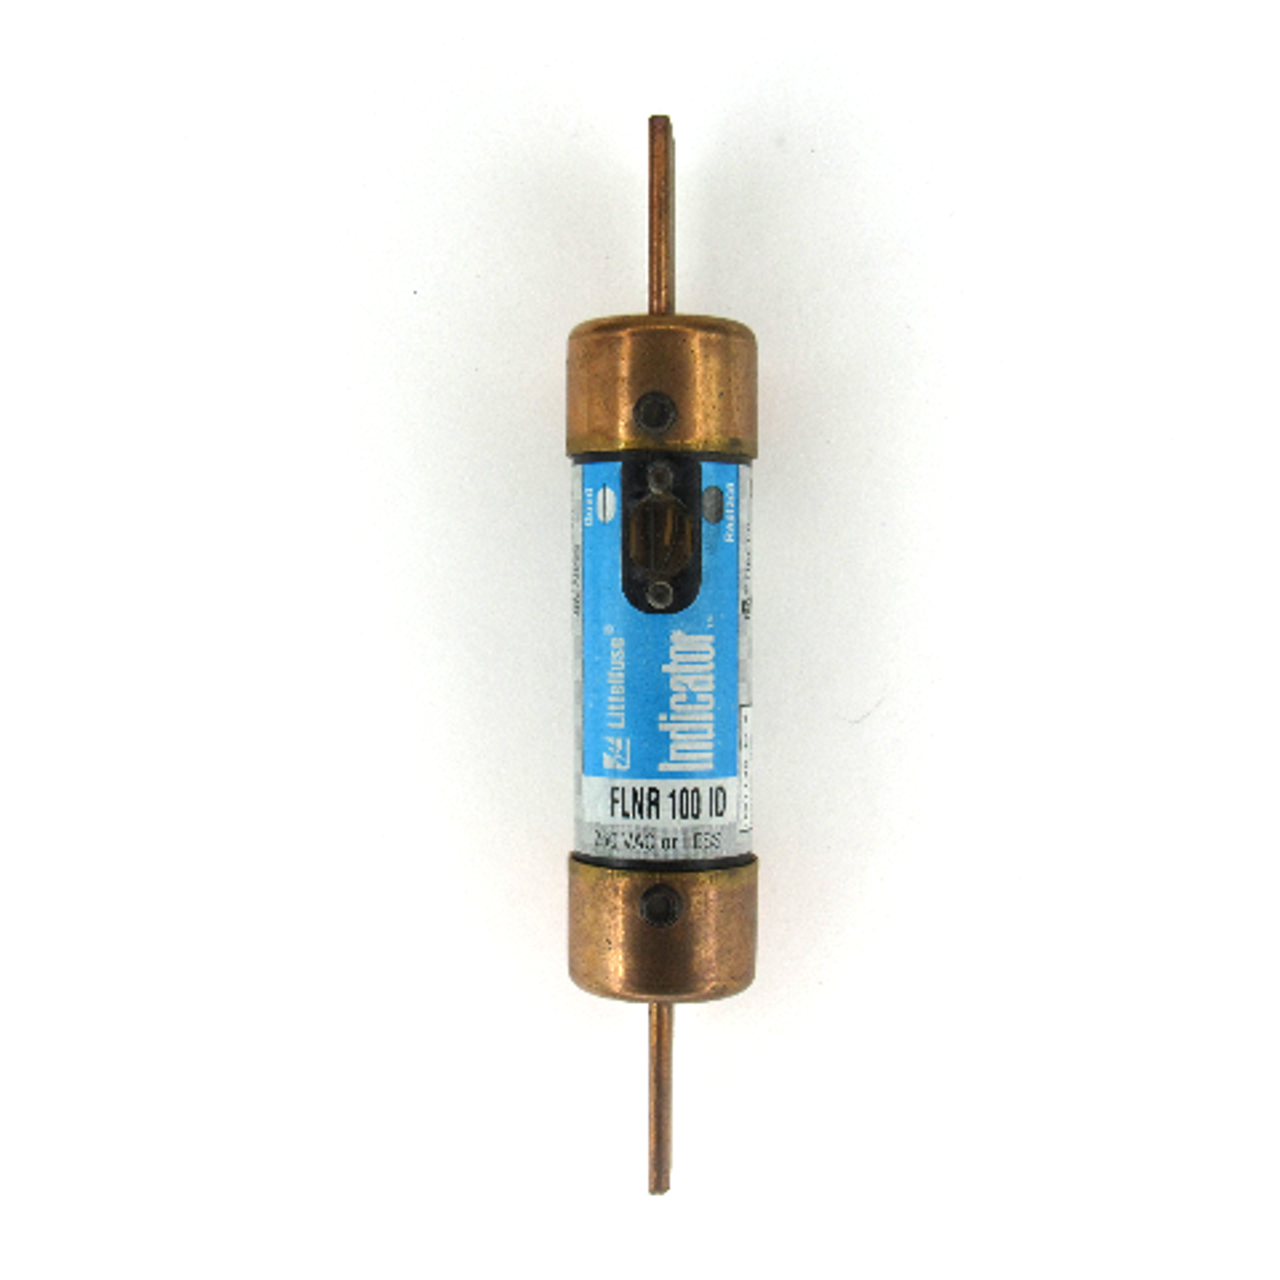 Littelfuse FLNR100ID Indicator Time-Delay Fuse, Current Limiting, Dual Element, 250V AC, 100 Amp